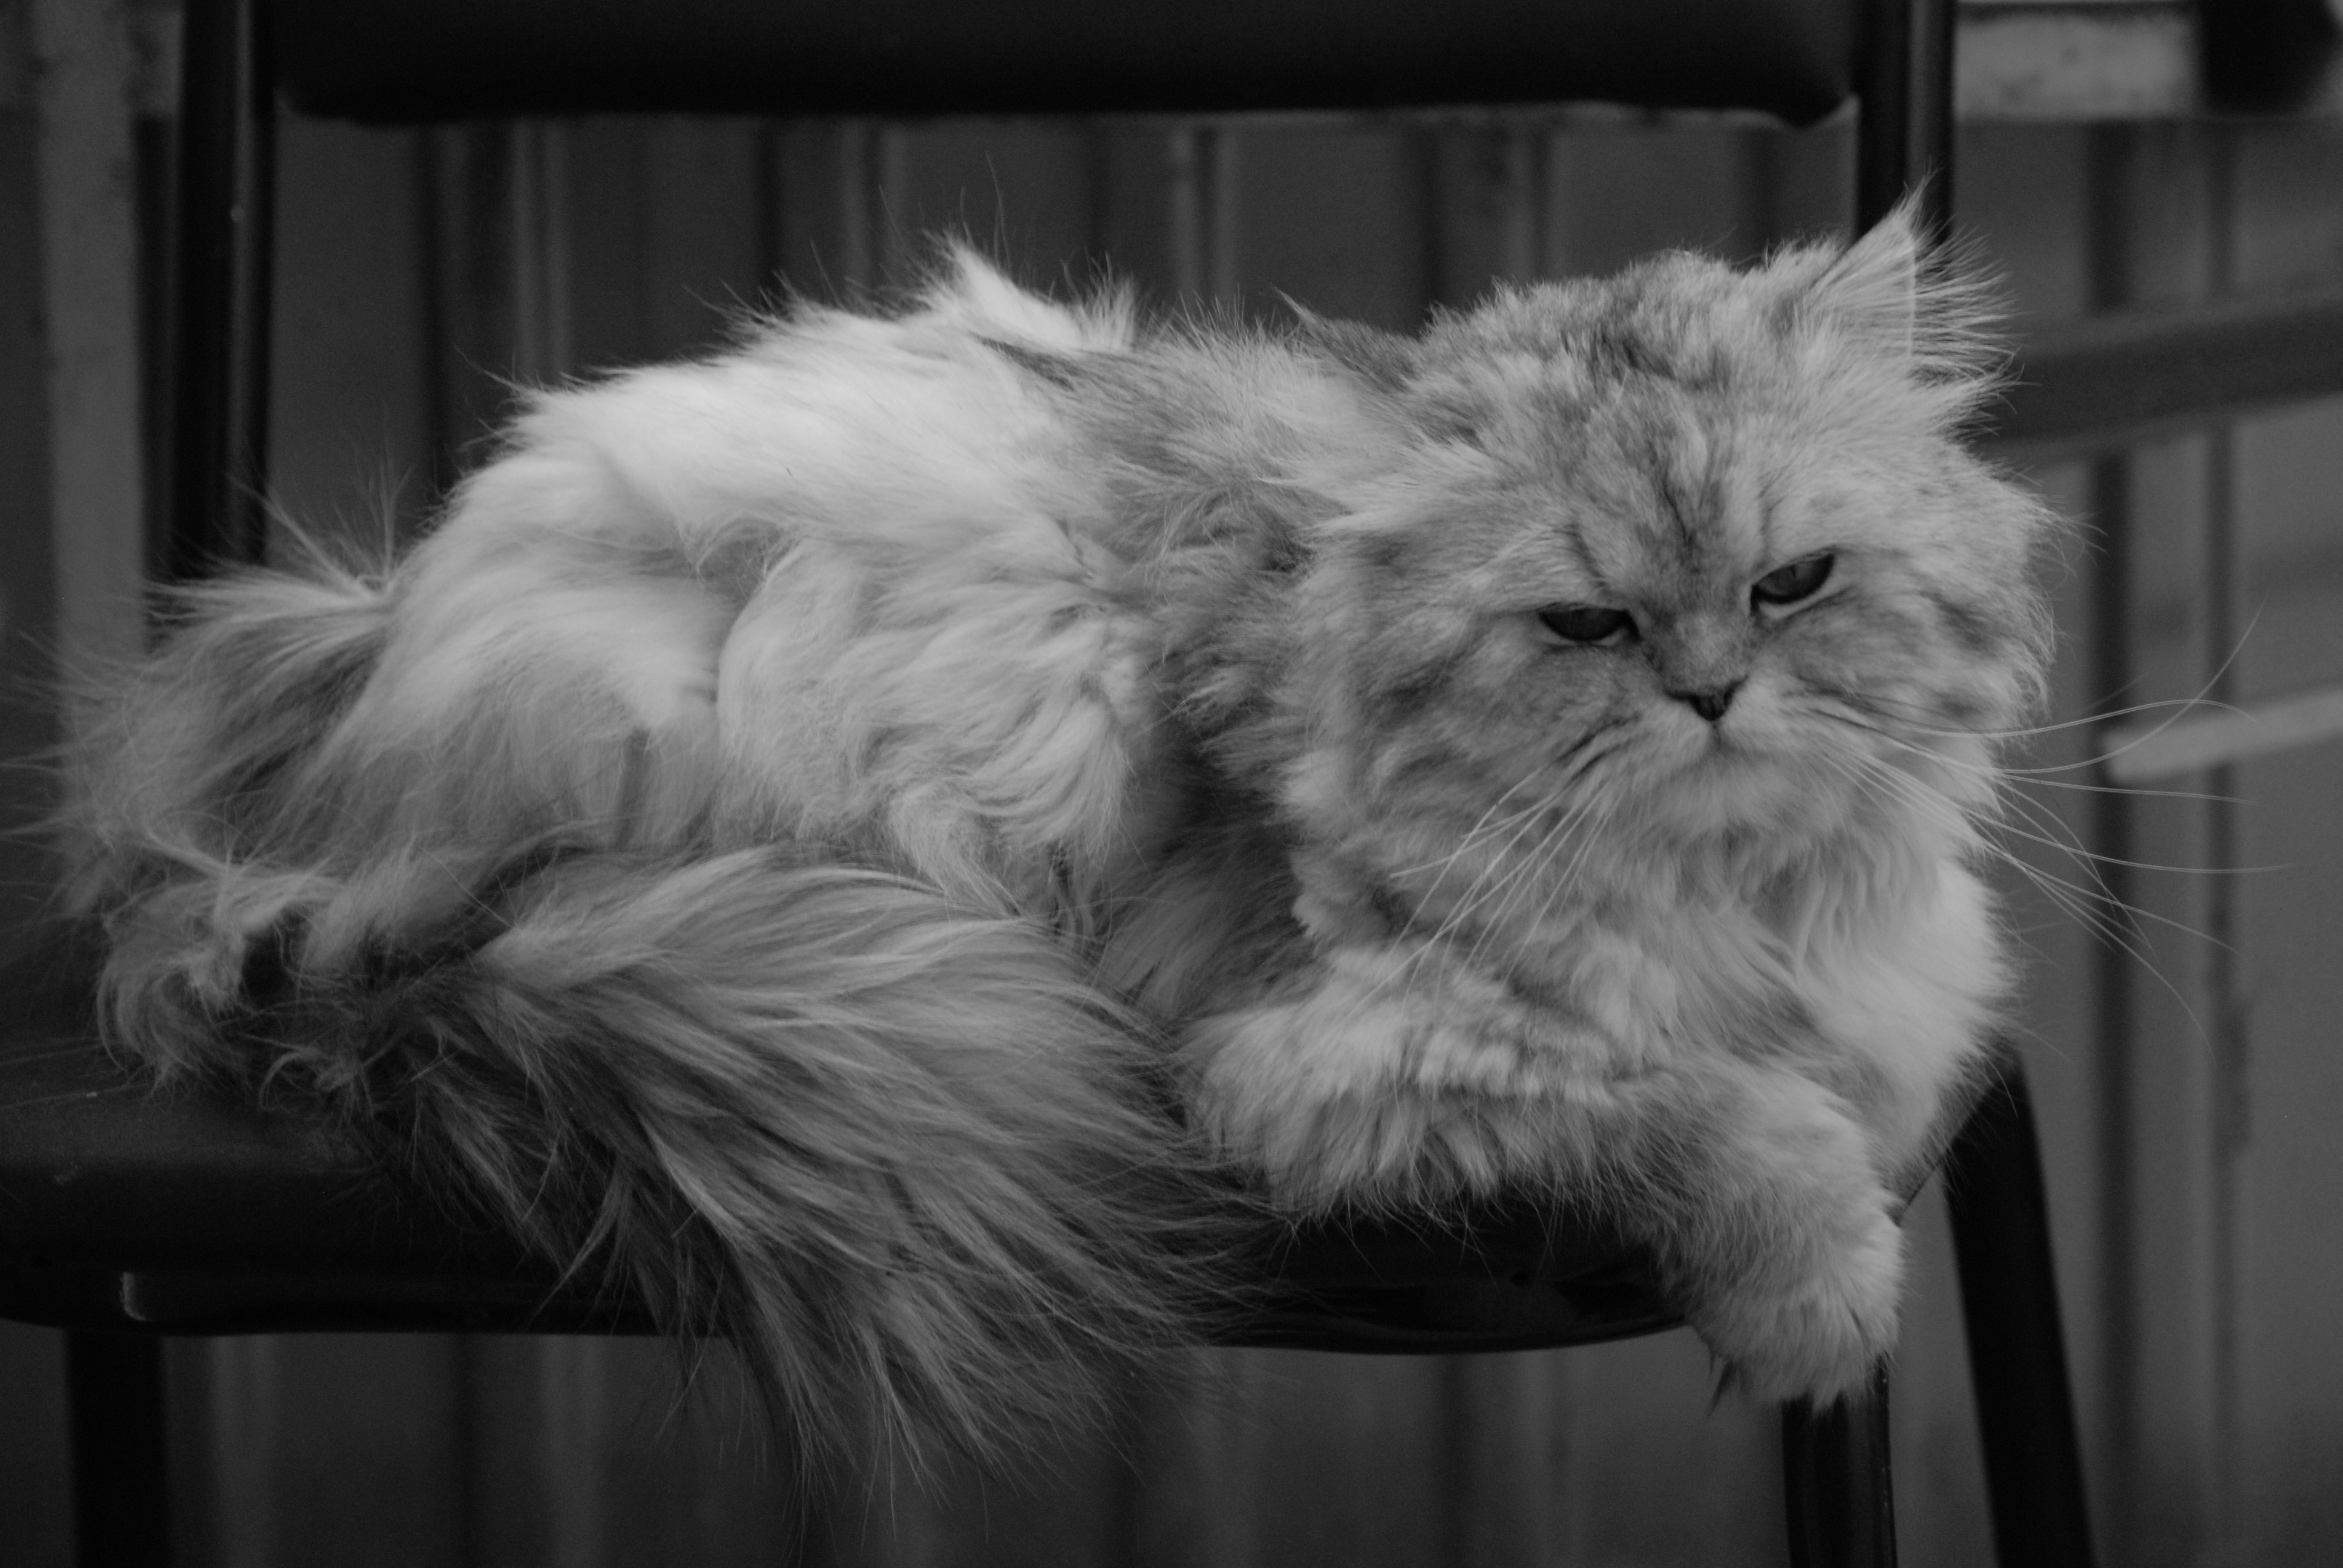 Fluffy long-haired cat